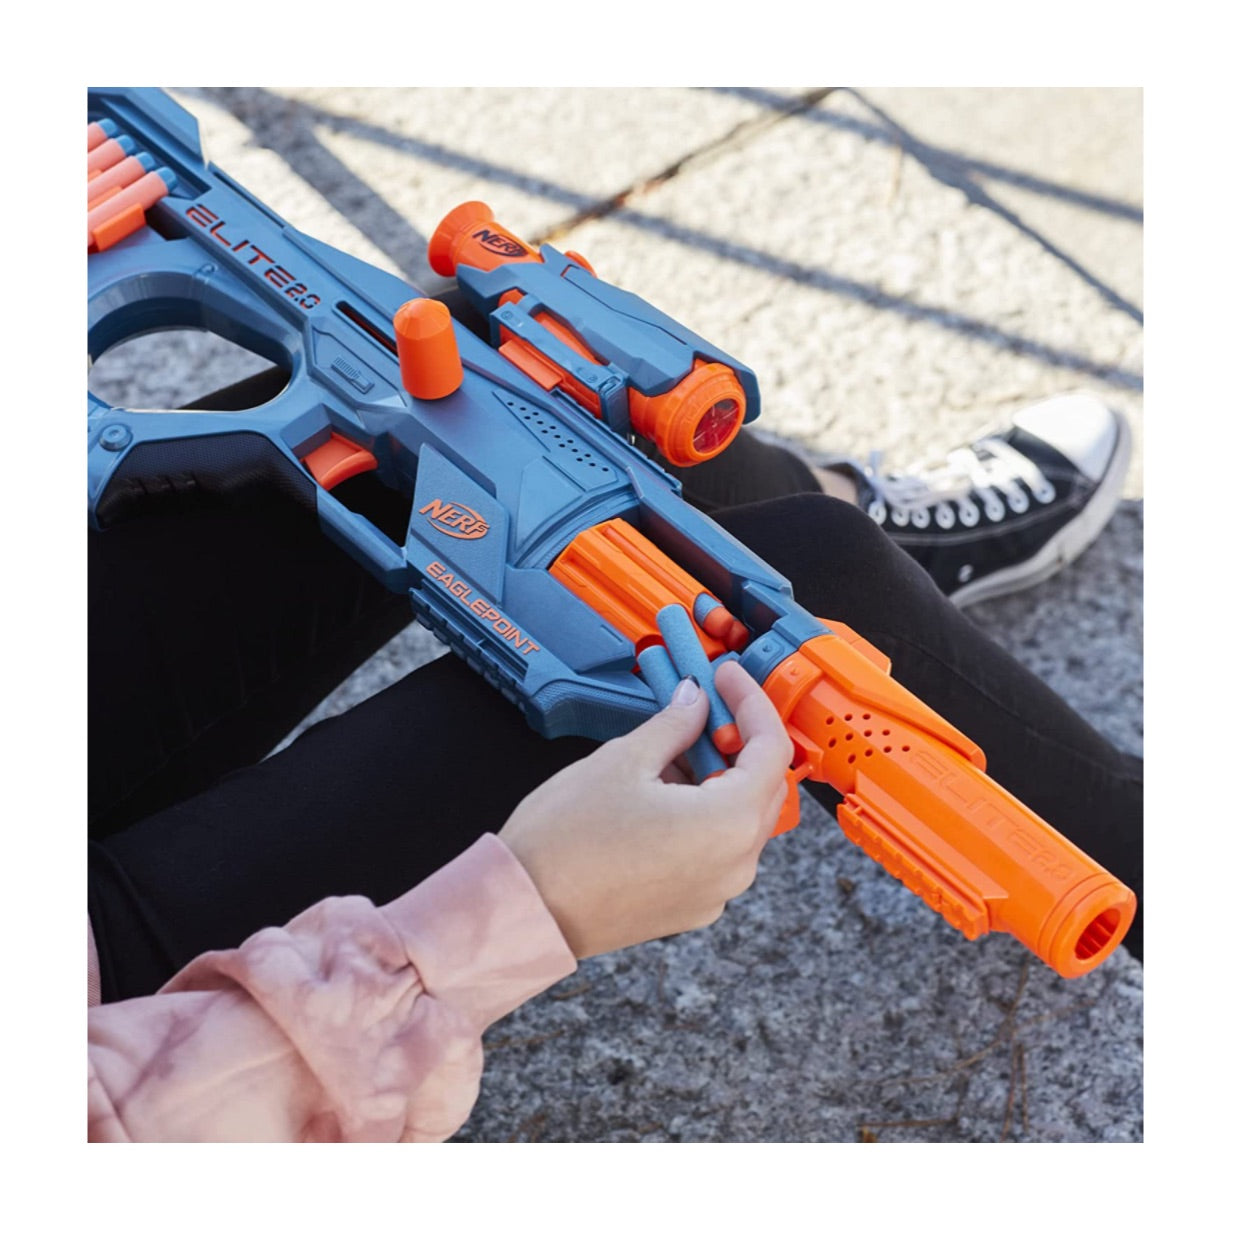 Buy Nerf Elite 2.0 Eaglepoint RD-8 blaster, with Detachable Scope